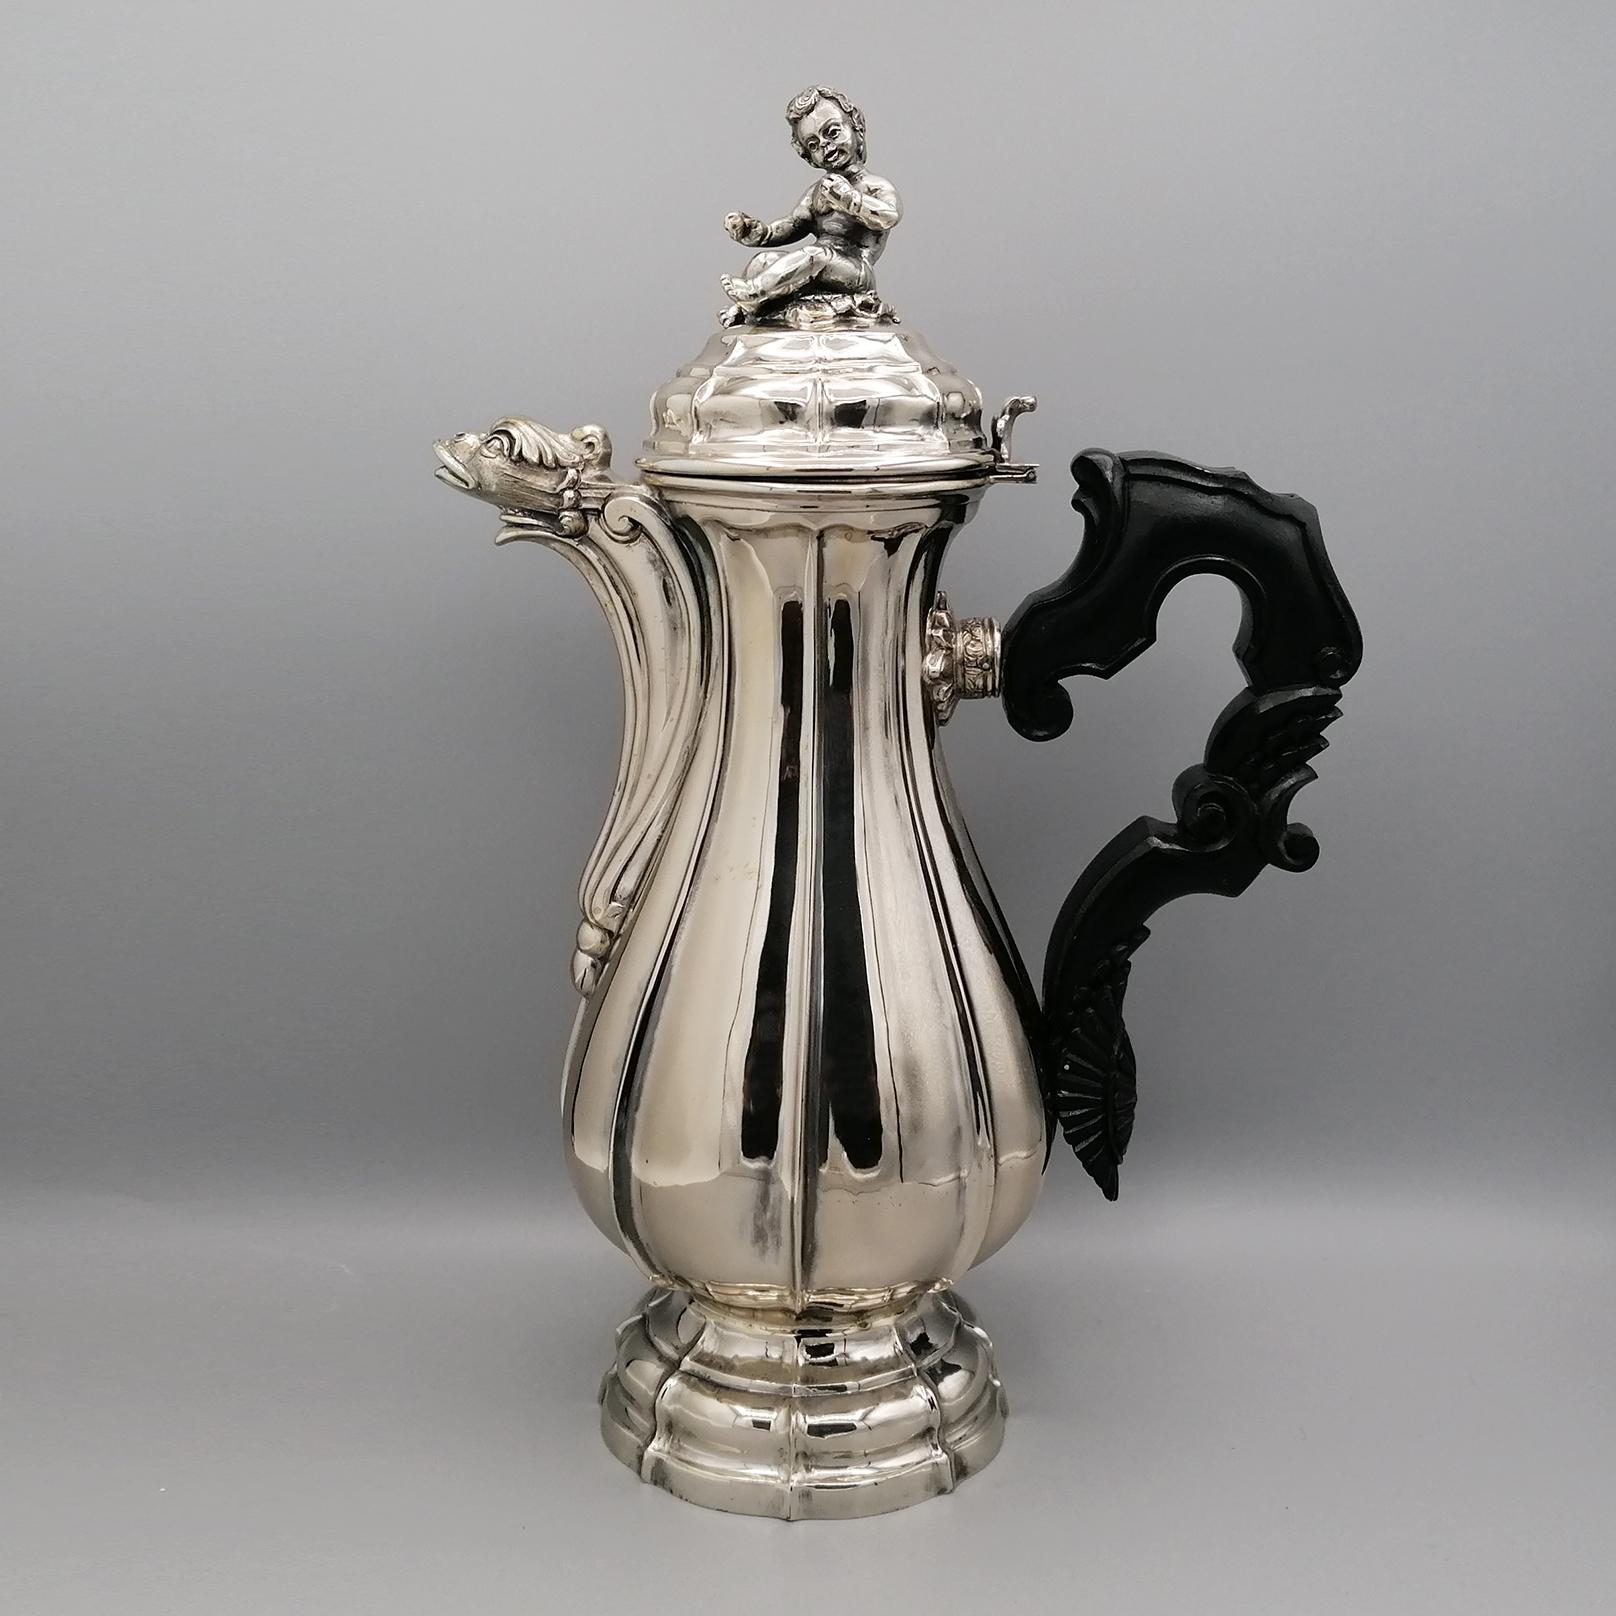 Italian Baroque style coffee pot in 800 solid silver, perfect copy of a coffee pot made by Domenico Tiomi in the first half of the 1700s.
The exceptionality of the original piece, as well as the perfect harmony of the lines, derives from the fact